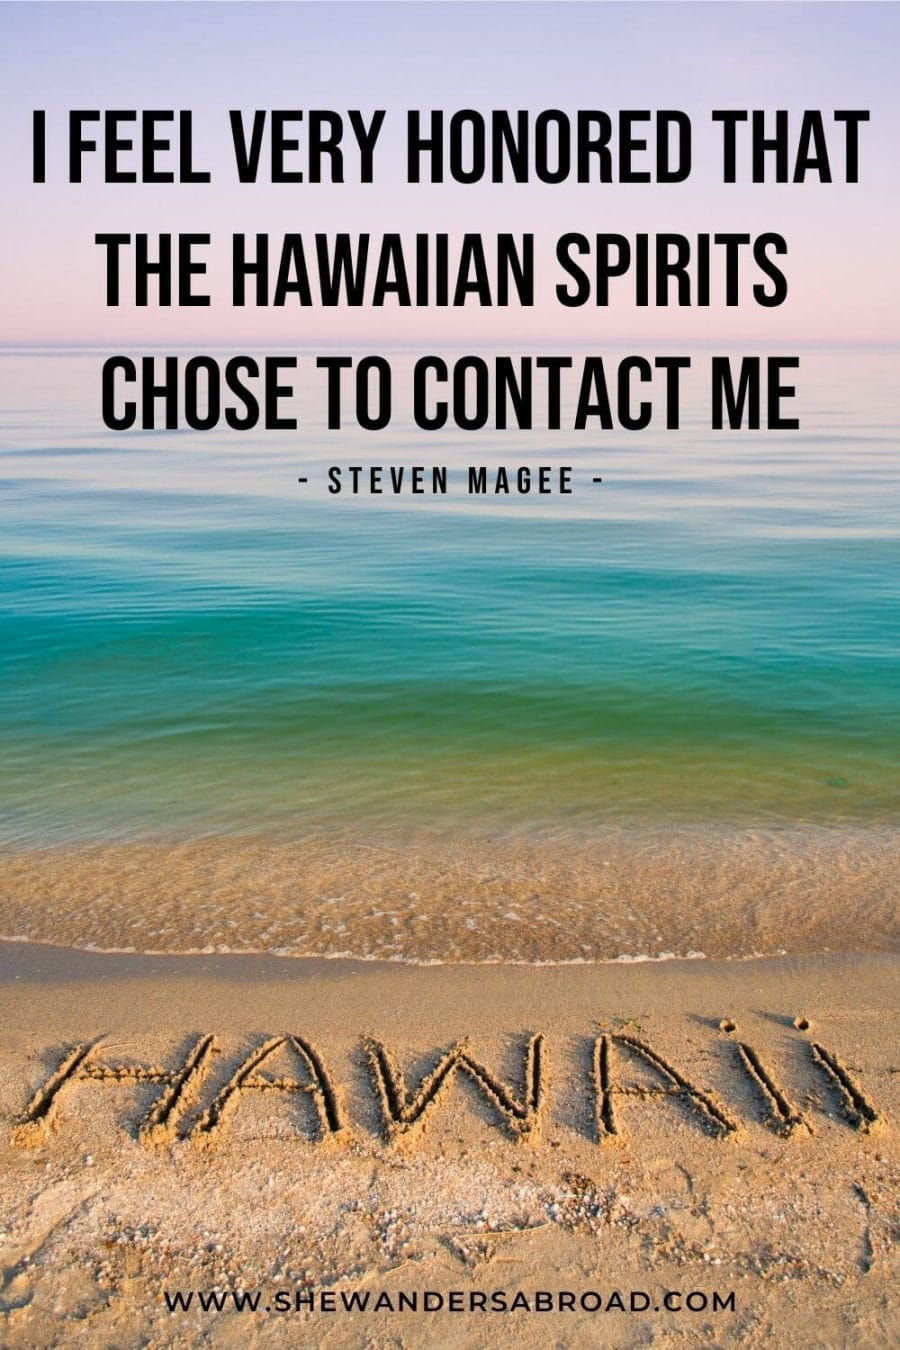 Best Hawaii Quotes for Instagram